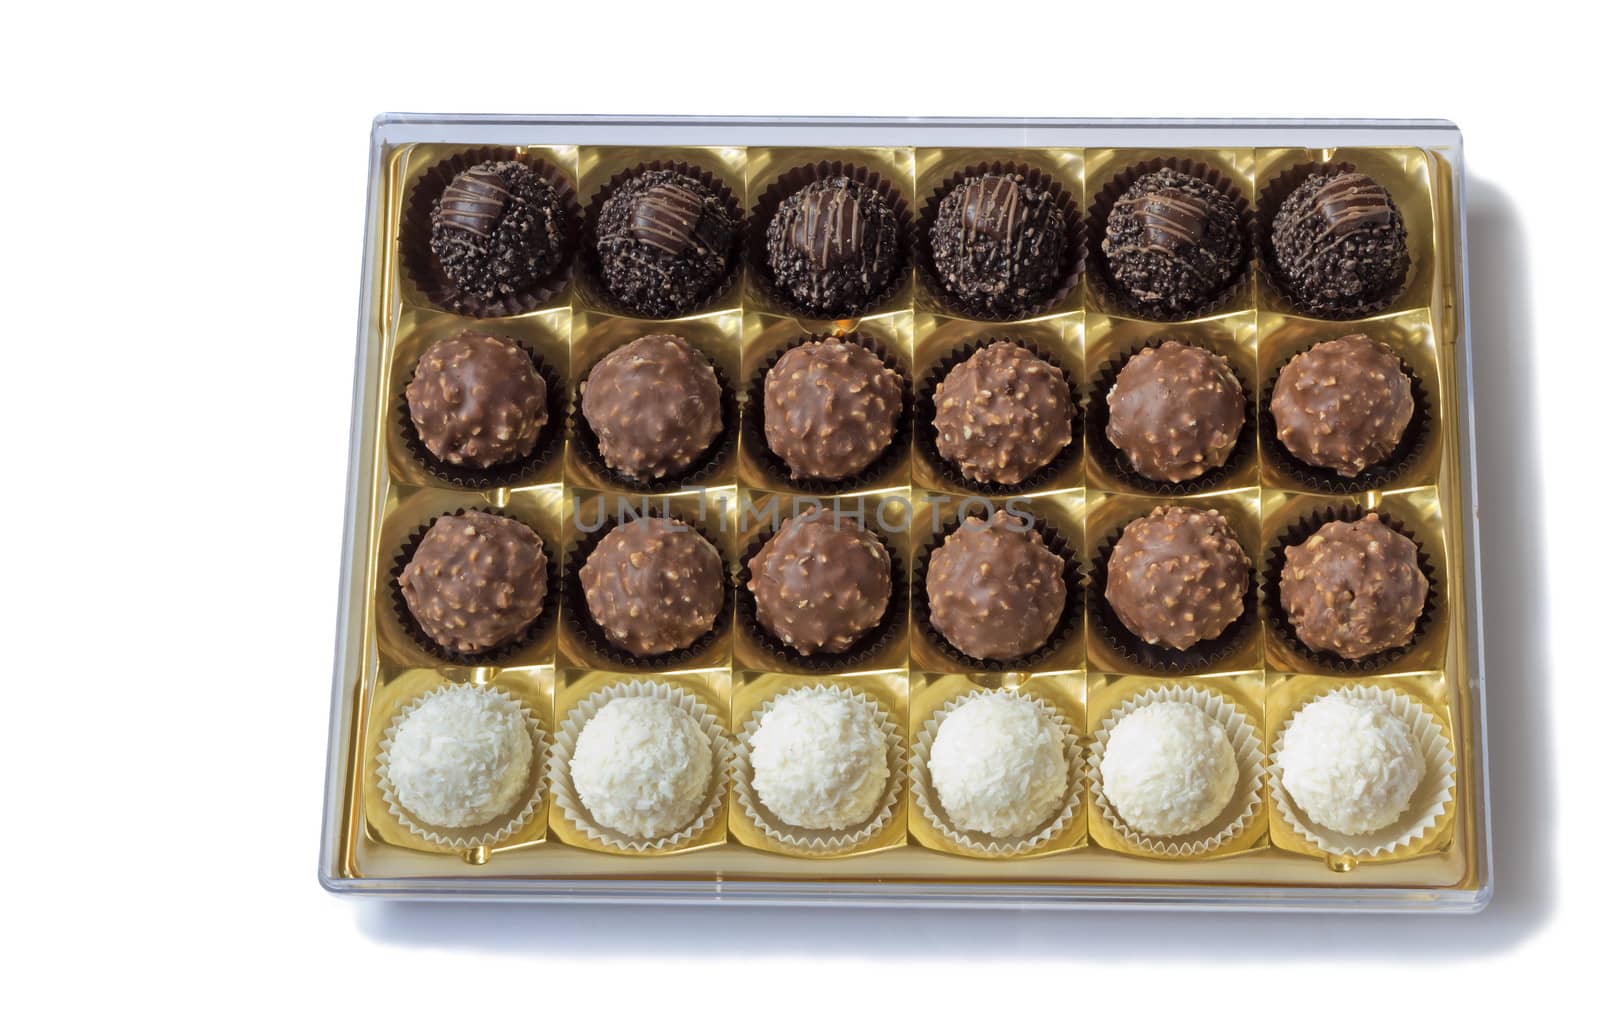 Fragment of the open blue boxes of chocolates. Presented on a white background